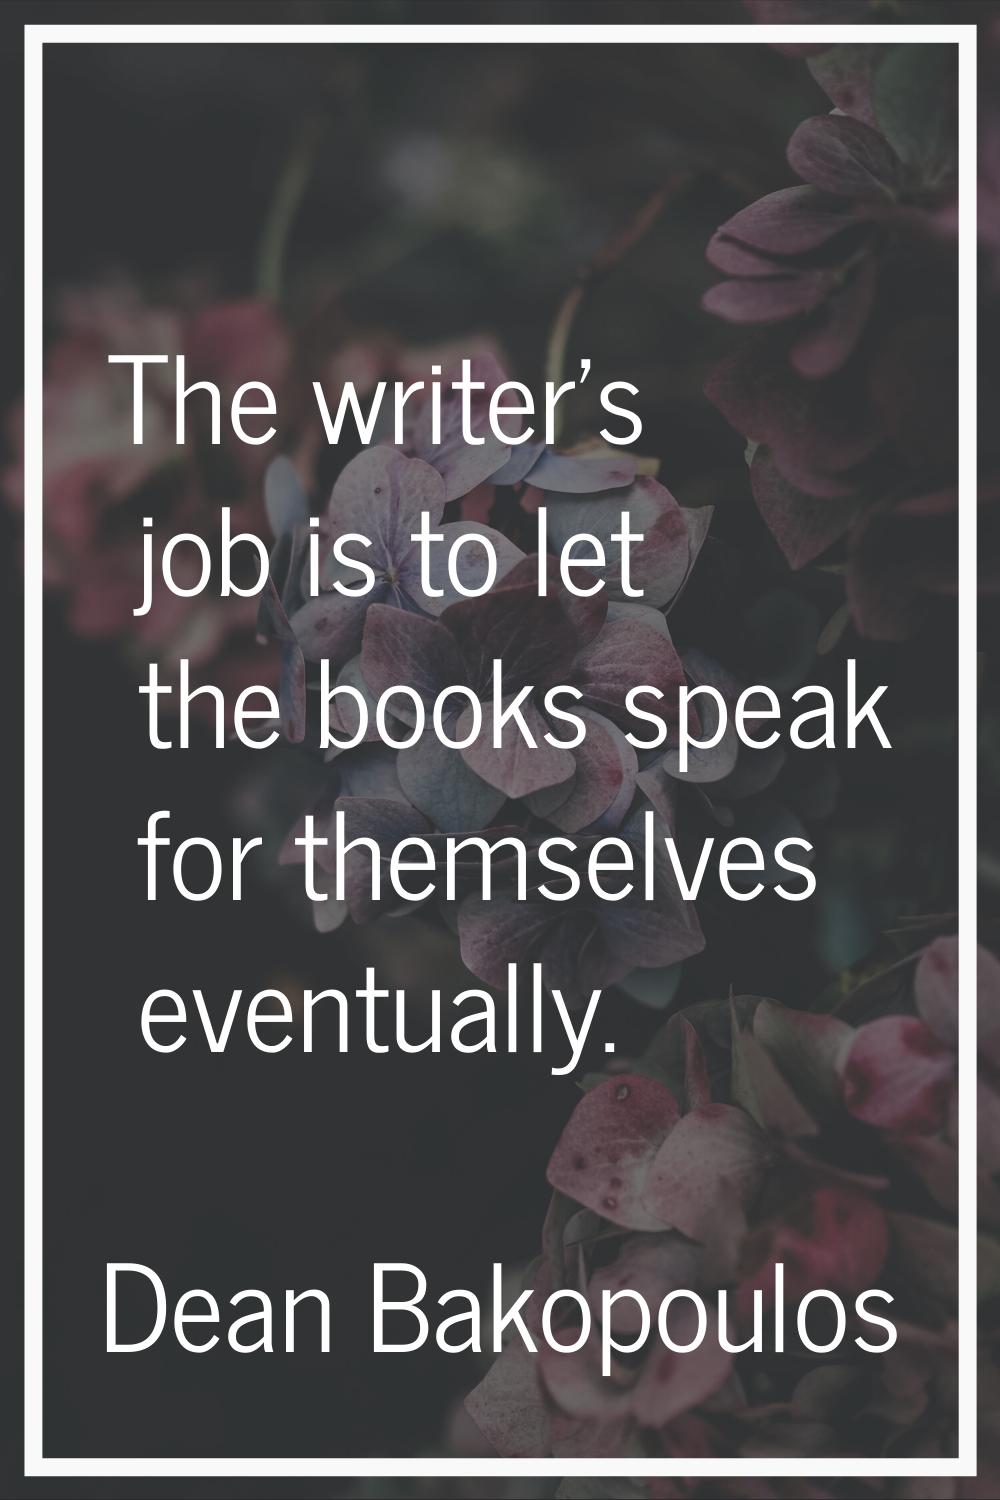 The writer's job is to let the books speak for themselves eventually.